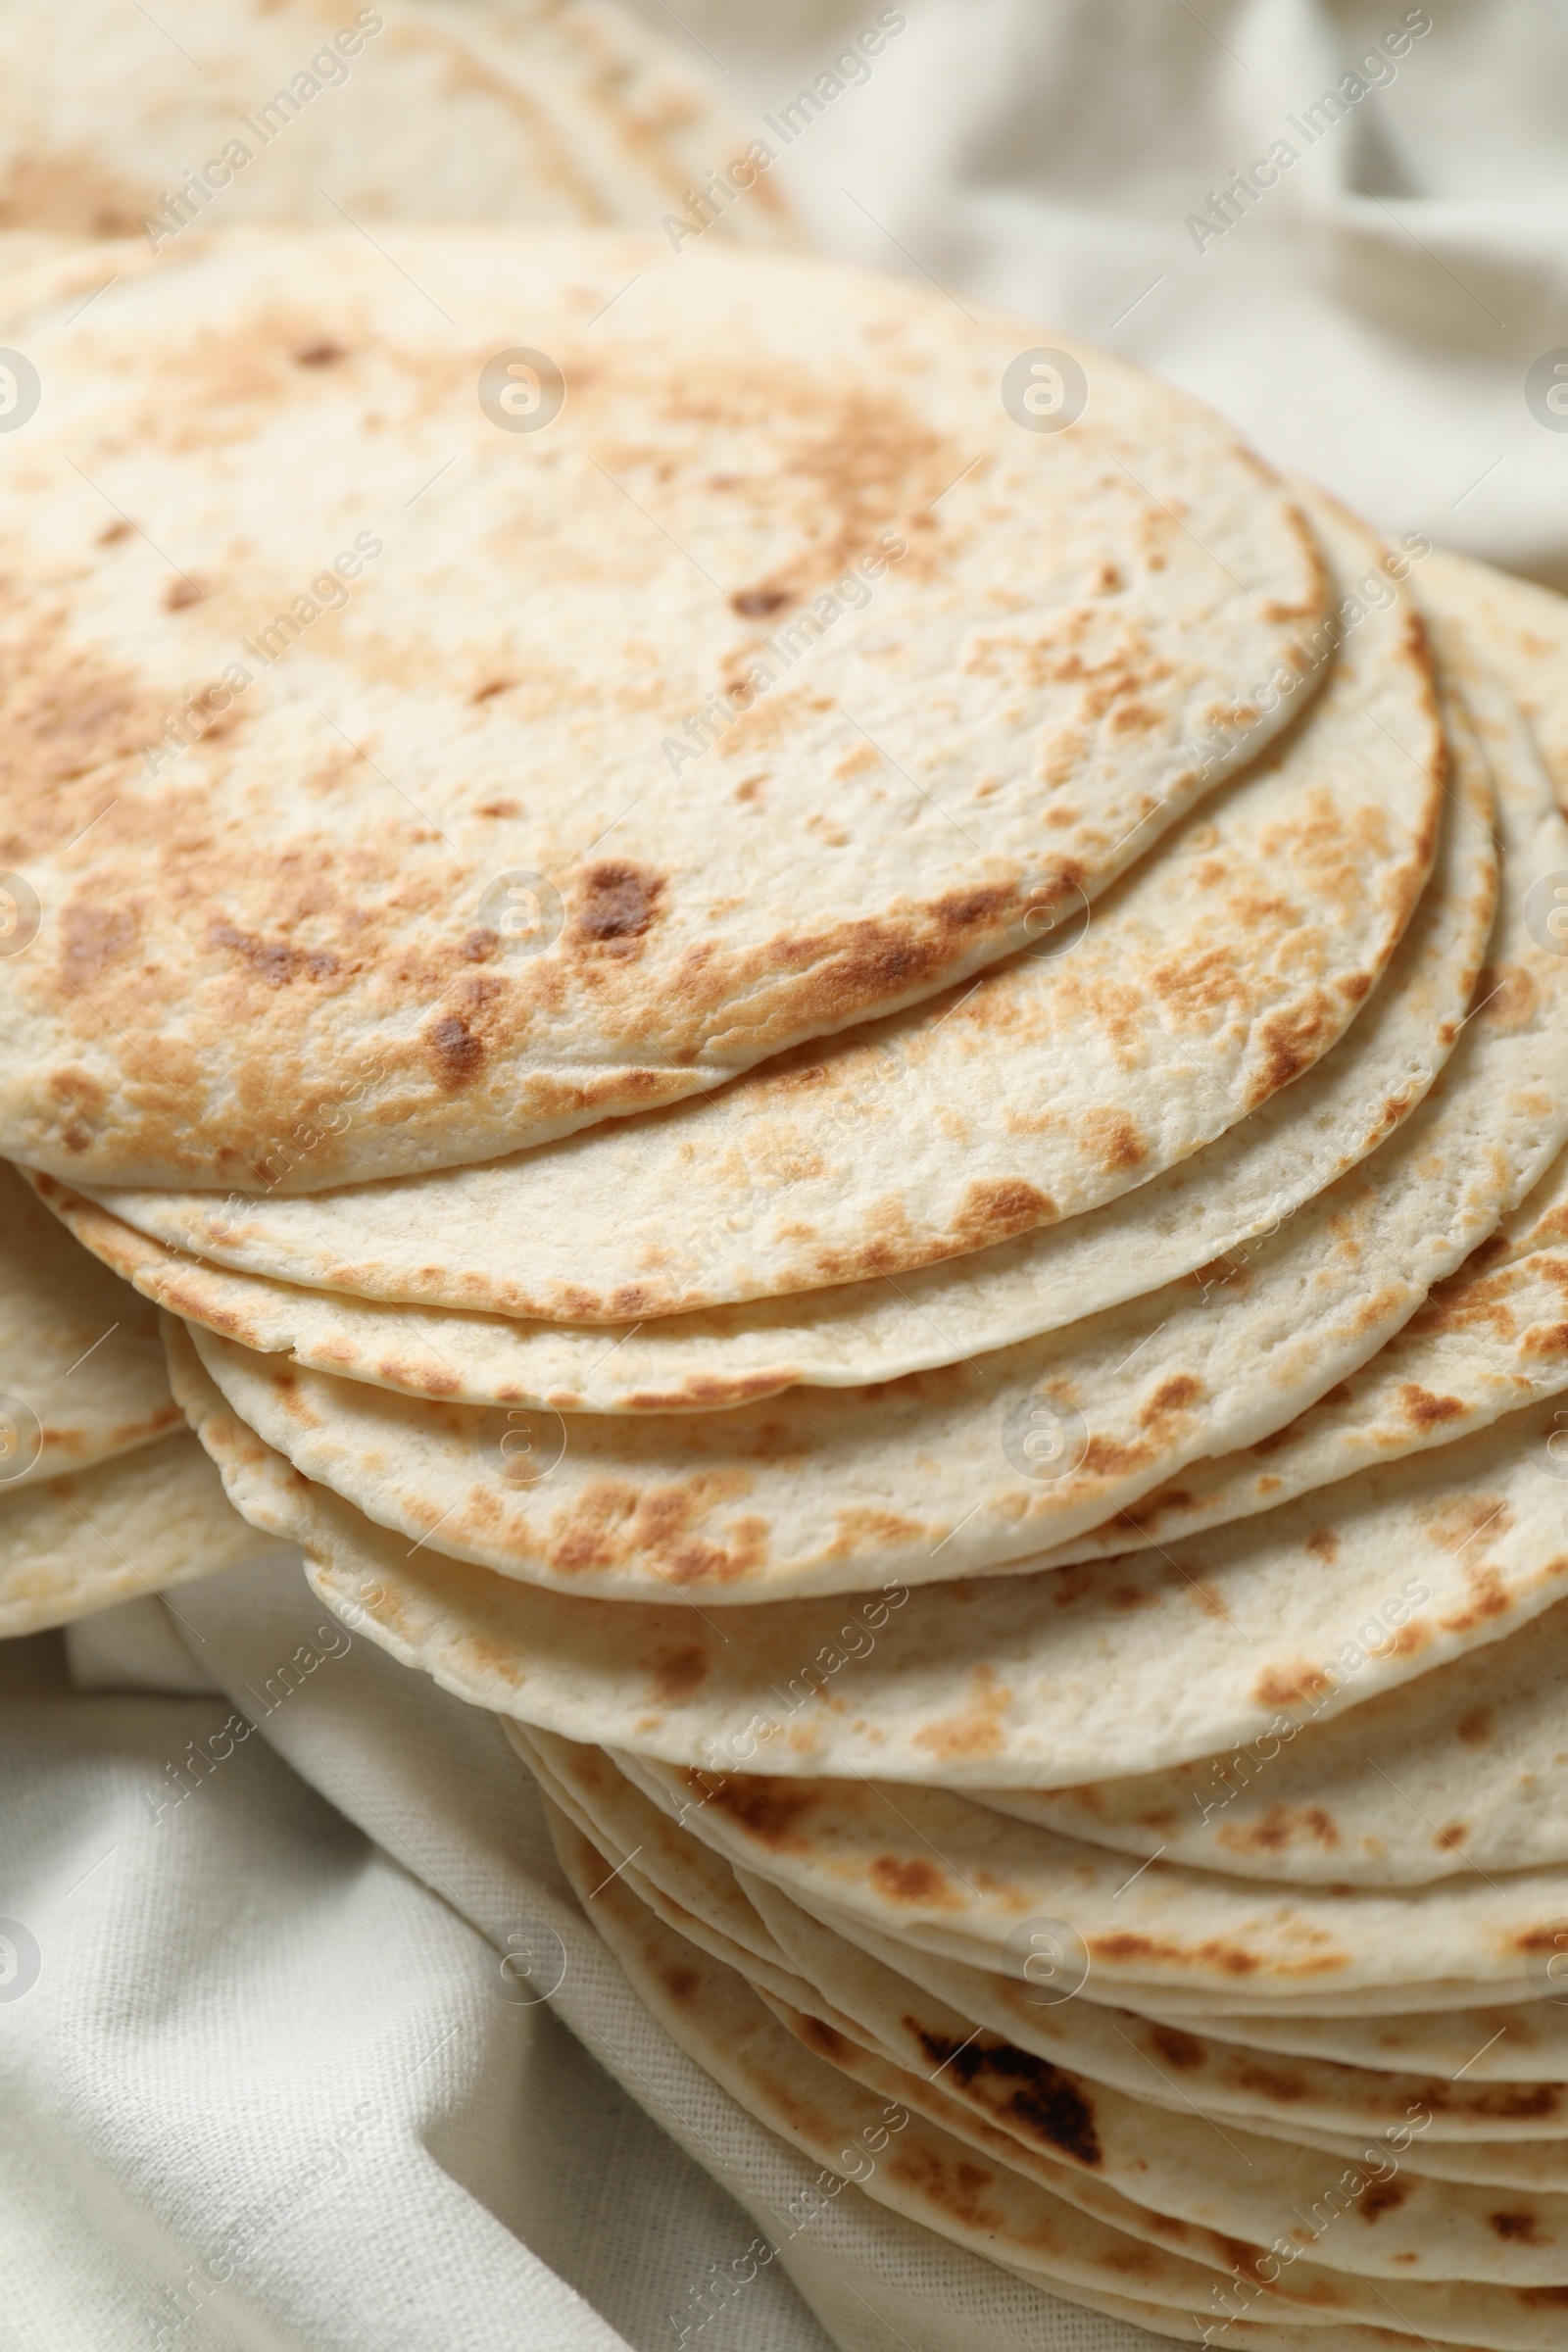 Photo of Tasty homemade tortillas and cloth on table